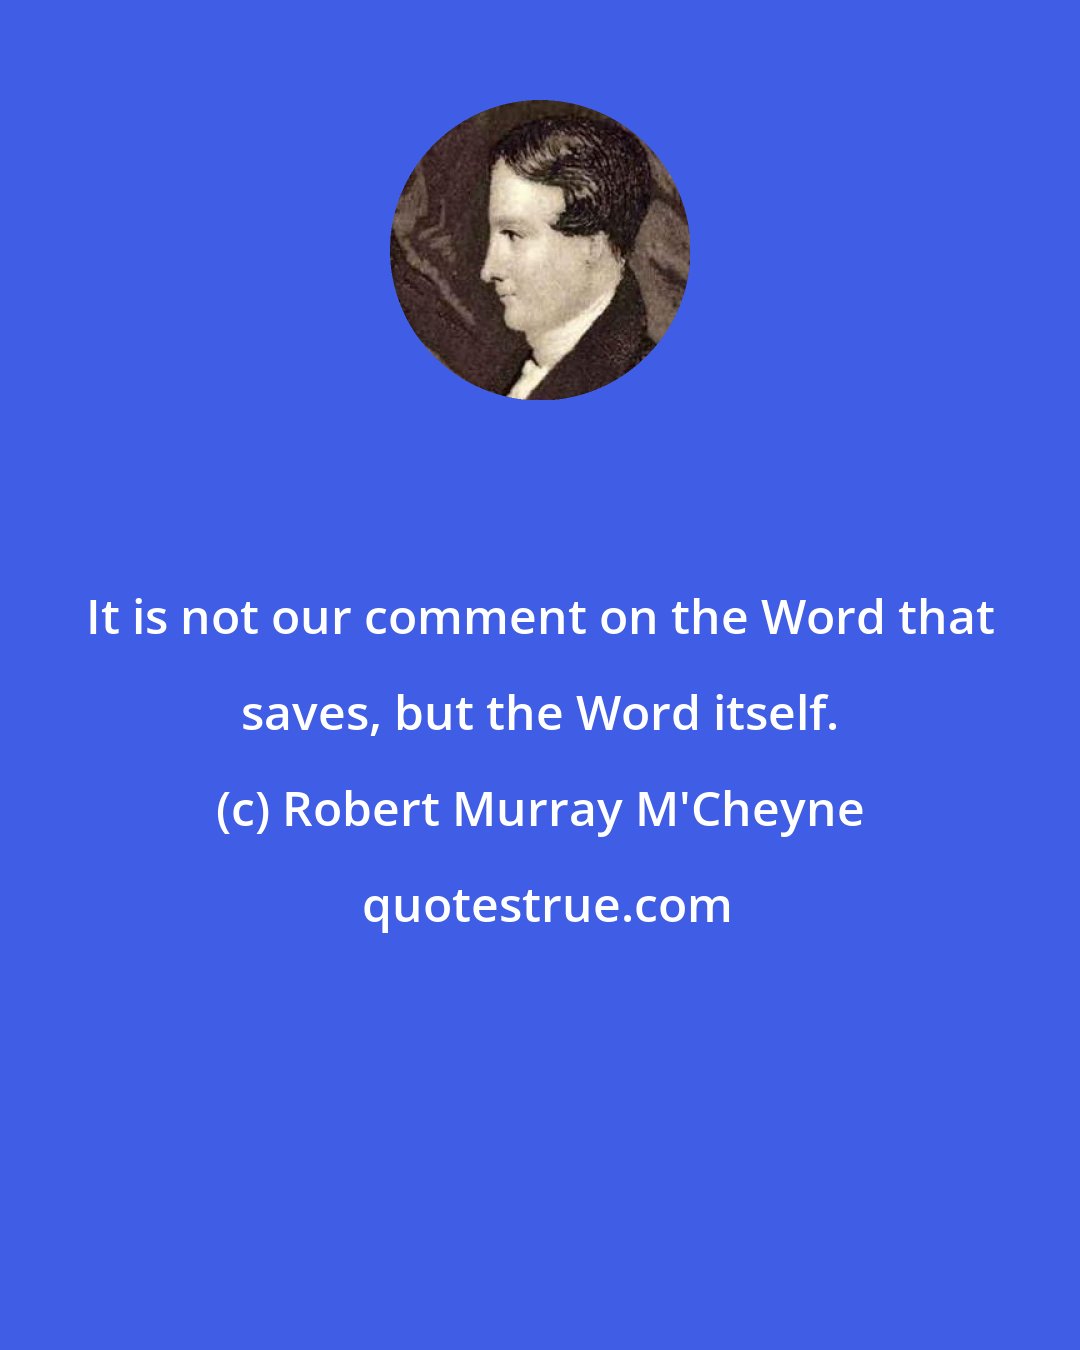 Robert Murray M'Cheyne: It is not our comment on the Word that saves, but the Word itself.